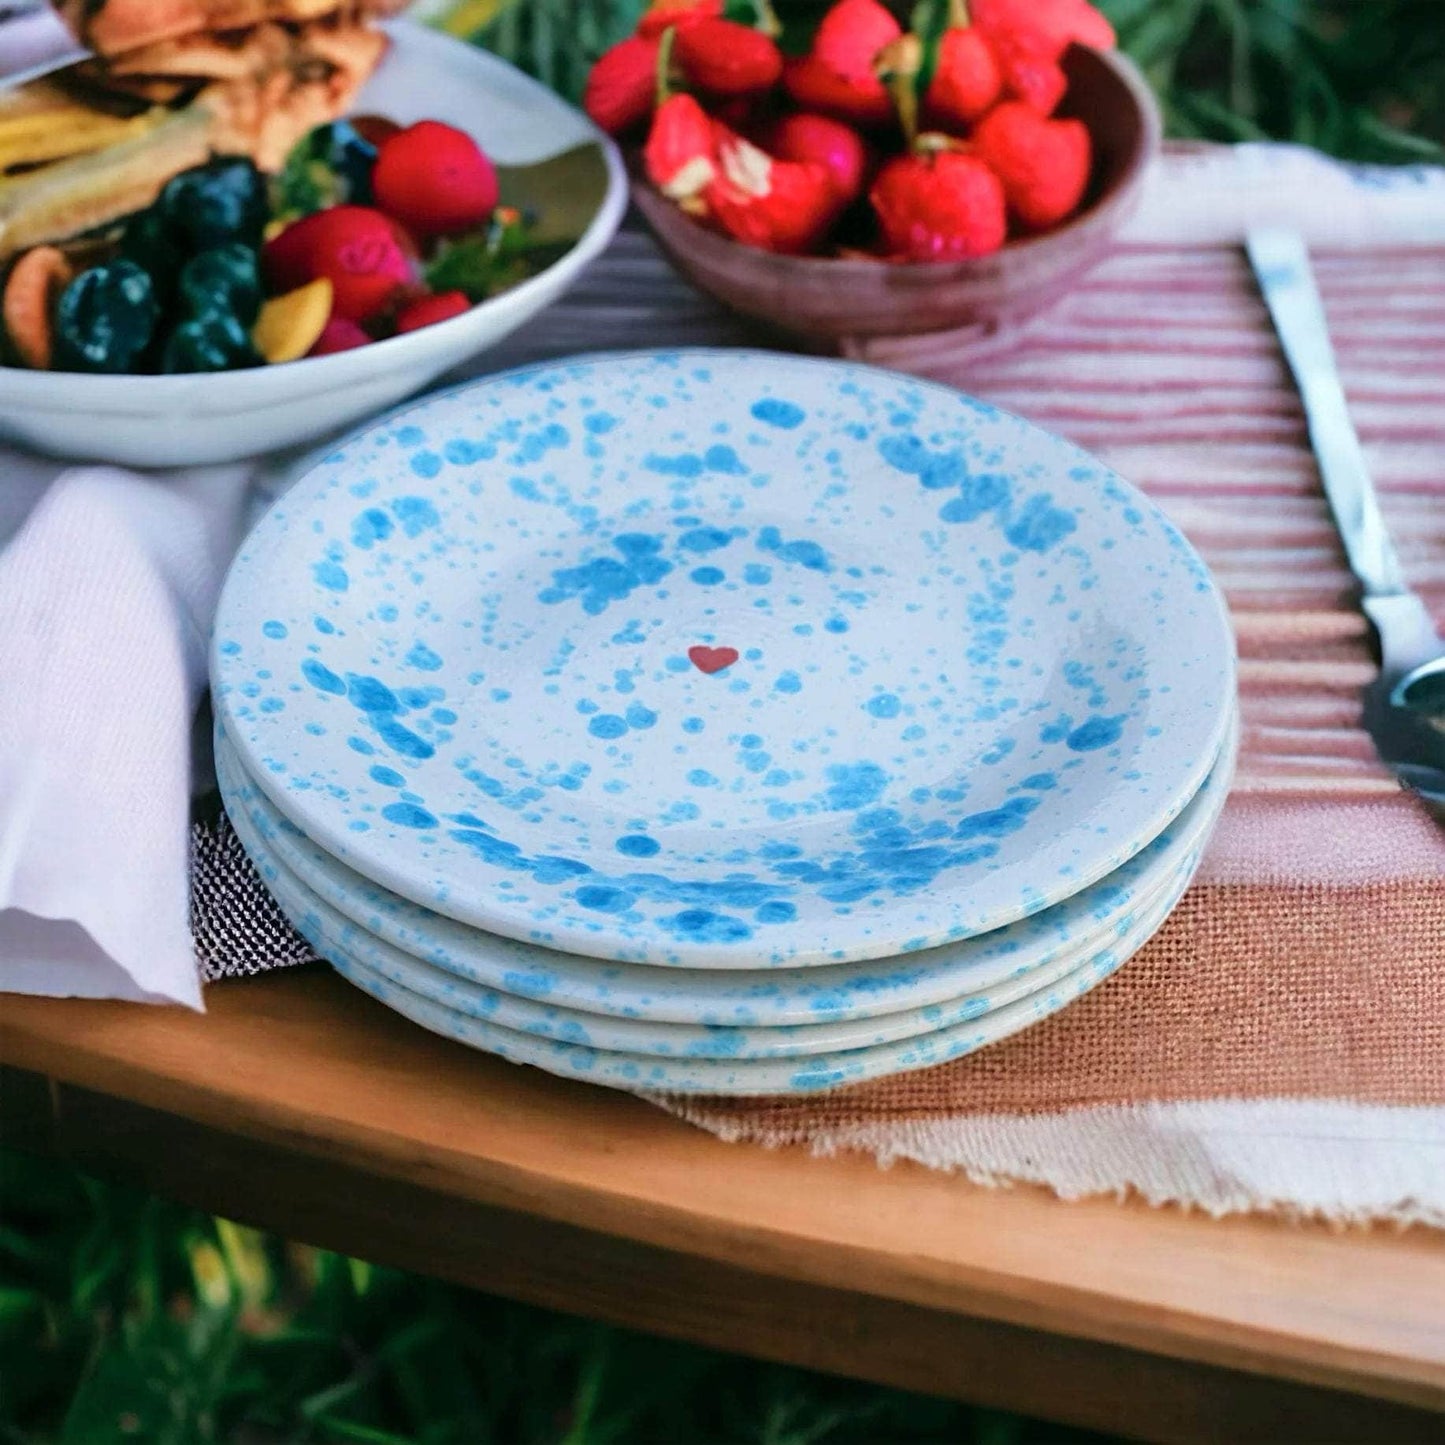 Hand-painted Speckled Blue Appertivo Plates | Set of Two